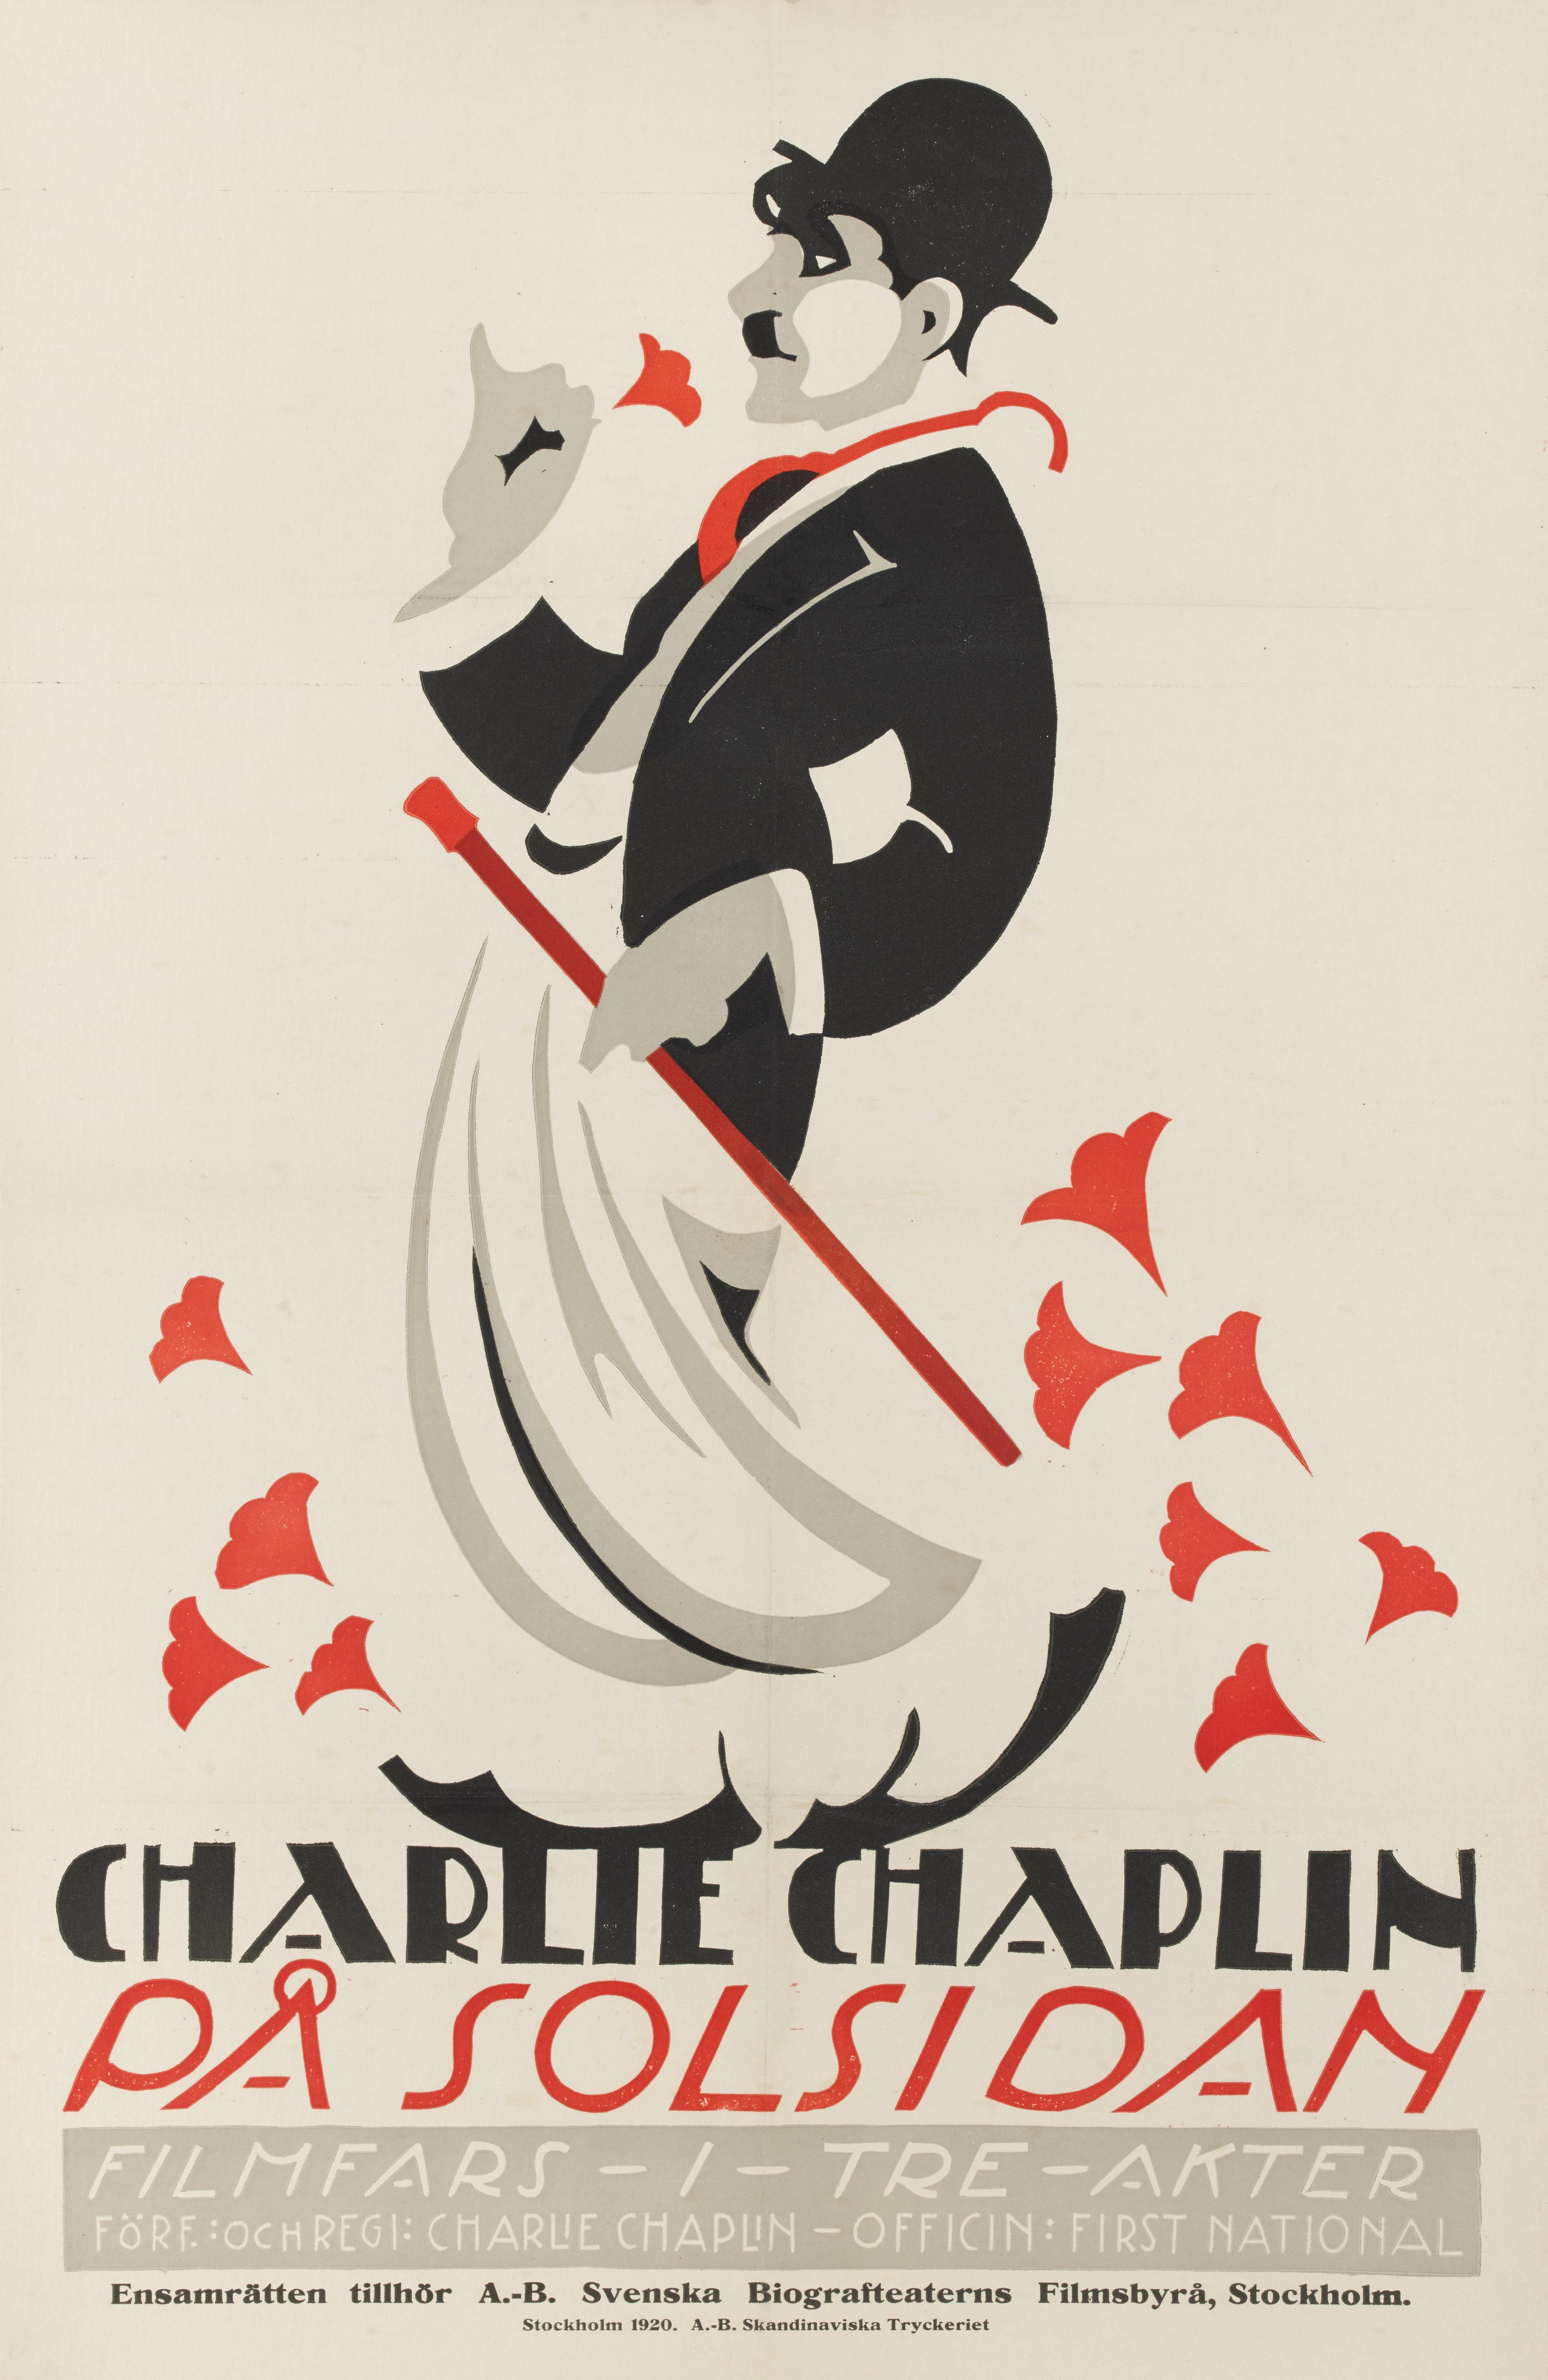 Original Swedish film poster for Charlie Chaplin and Edna Purviance 1919 silent comedy.
This poster is for the films first Swedish release 1920.
This one hundred and two year old poster is exceptionally rare, and has only surfaced a few